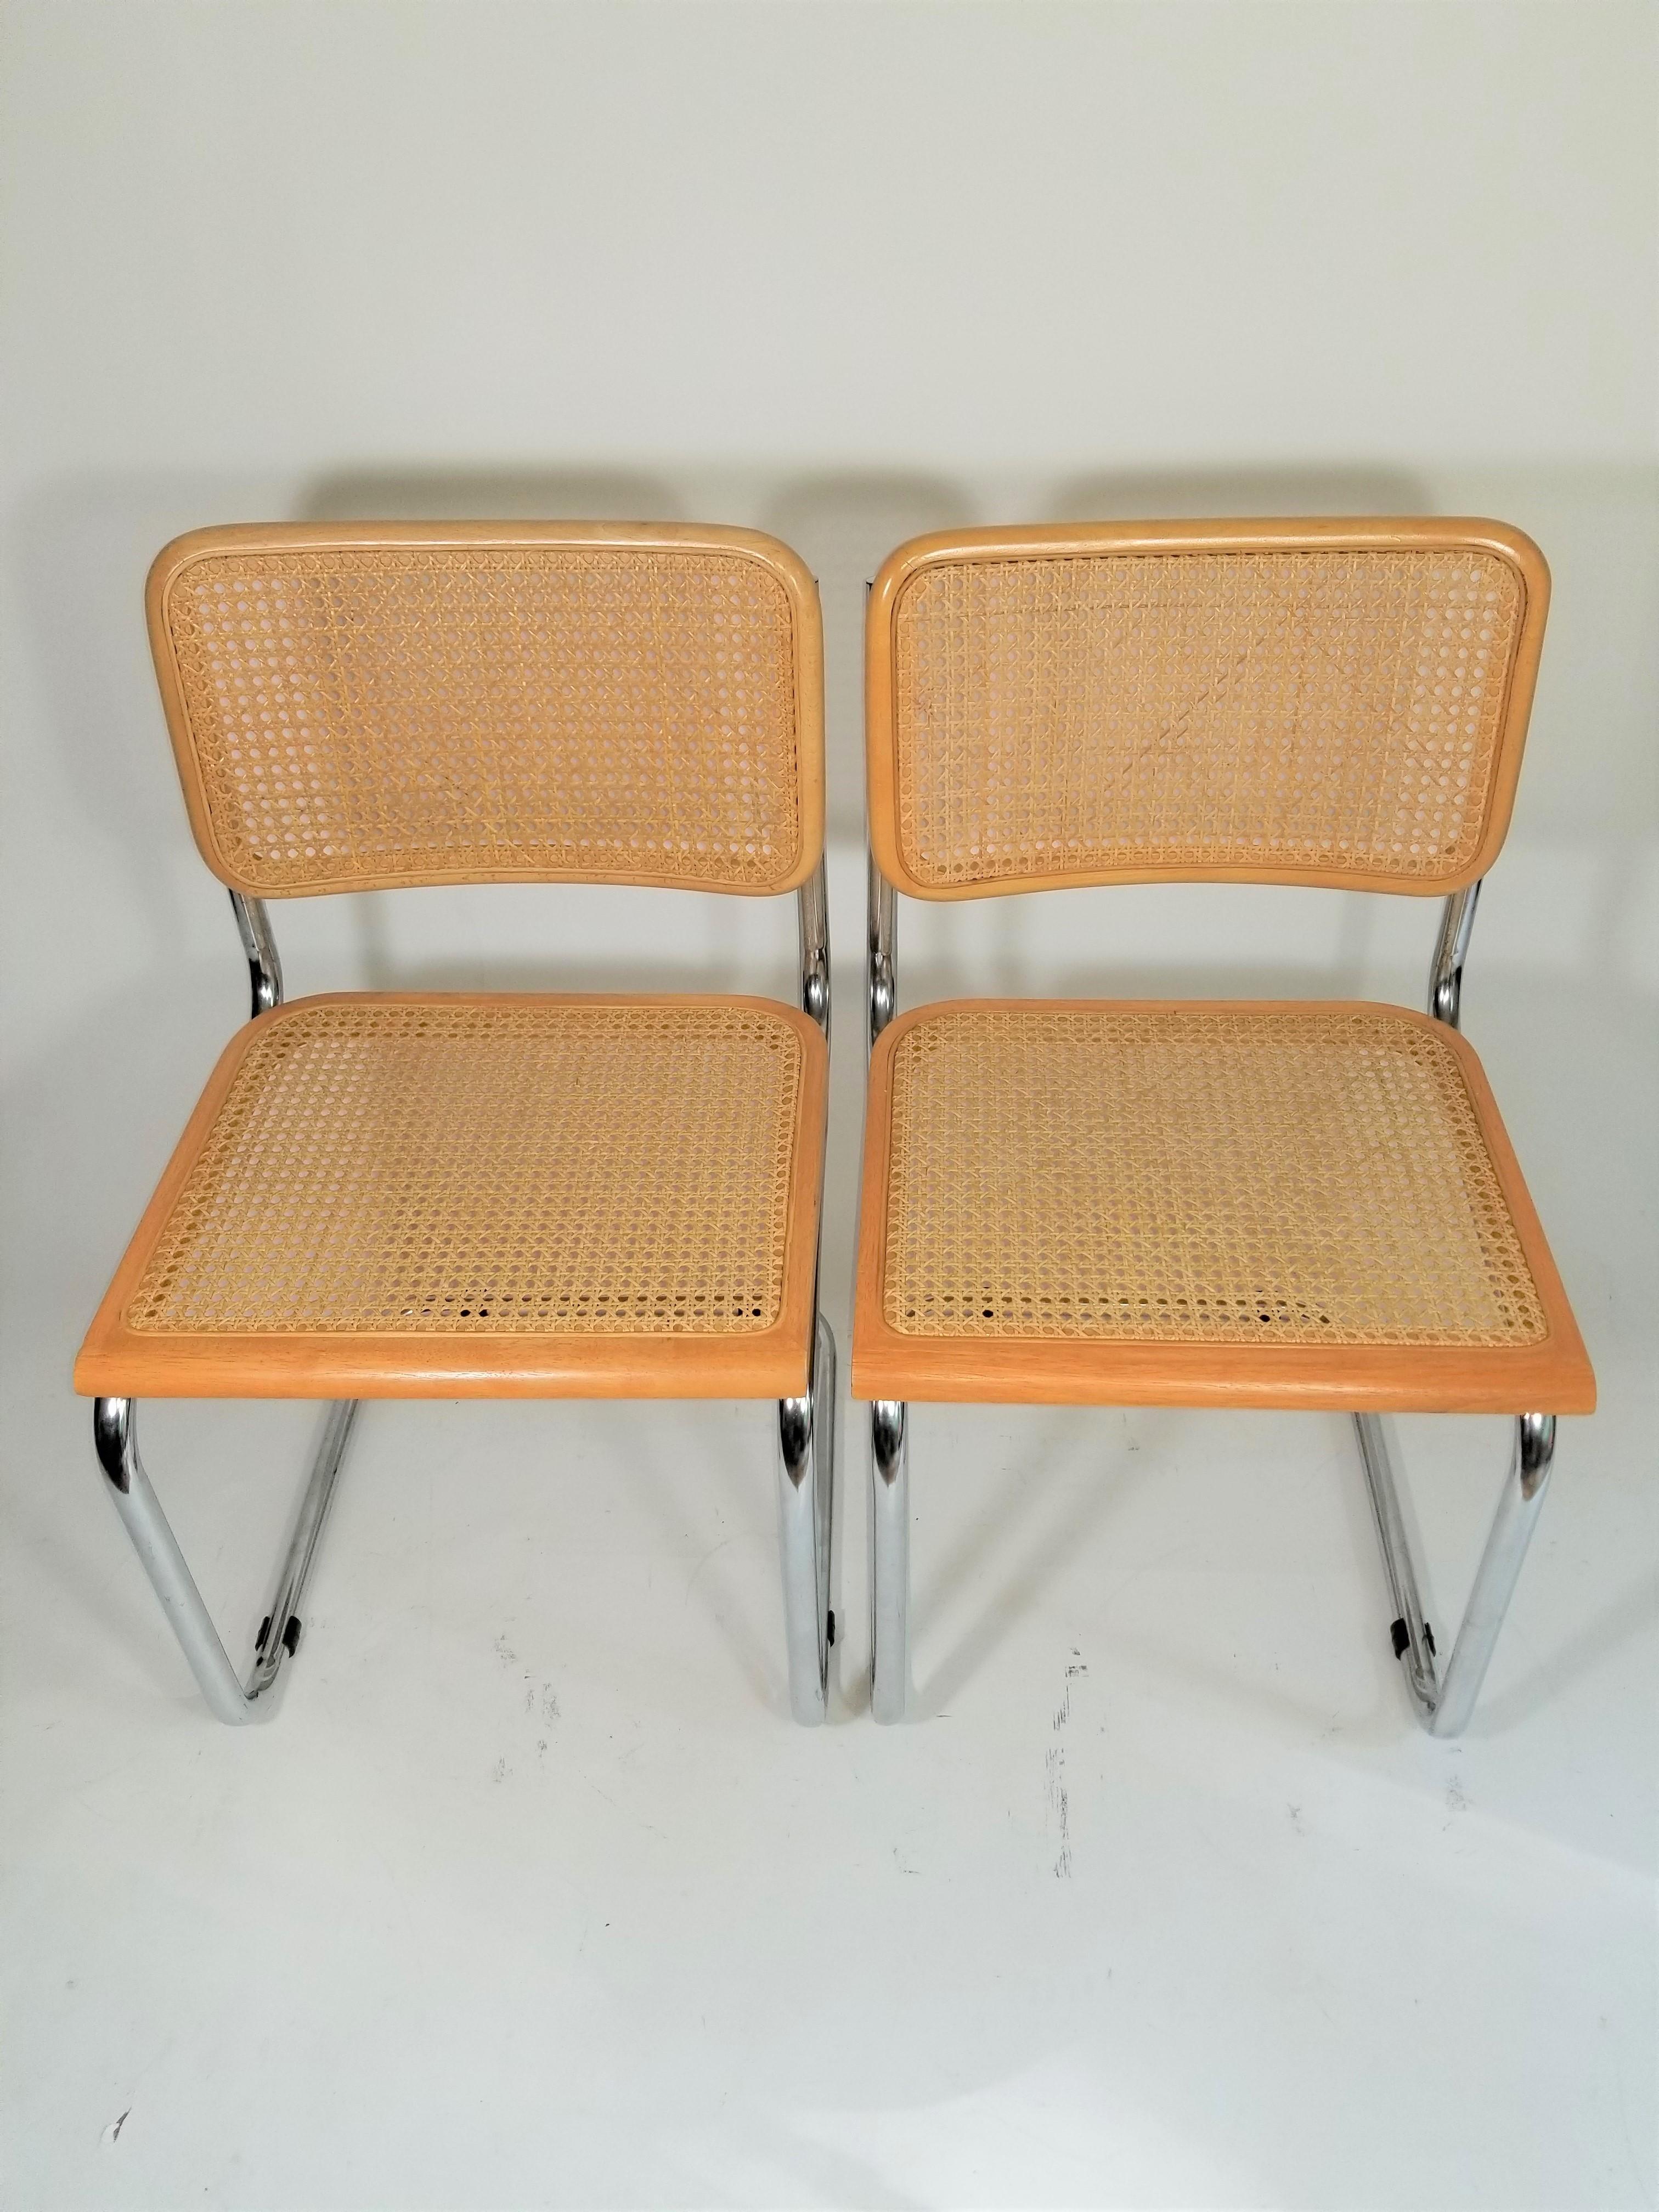 Pair of Midcentury Marcel Breuer Cesca side chairs. Cane seats and backs. Classic chrome tubular Cantilever steel frames.
Complimentary free delivery can me arranged for this item in NYC and surrounding areas.